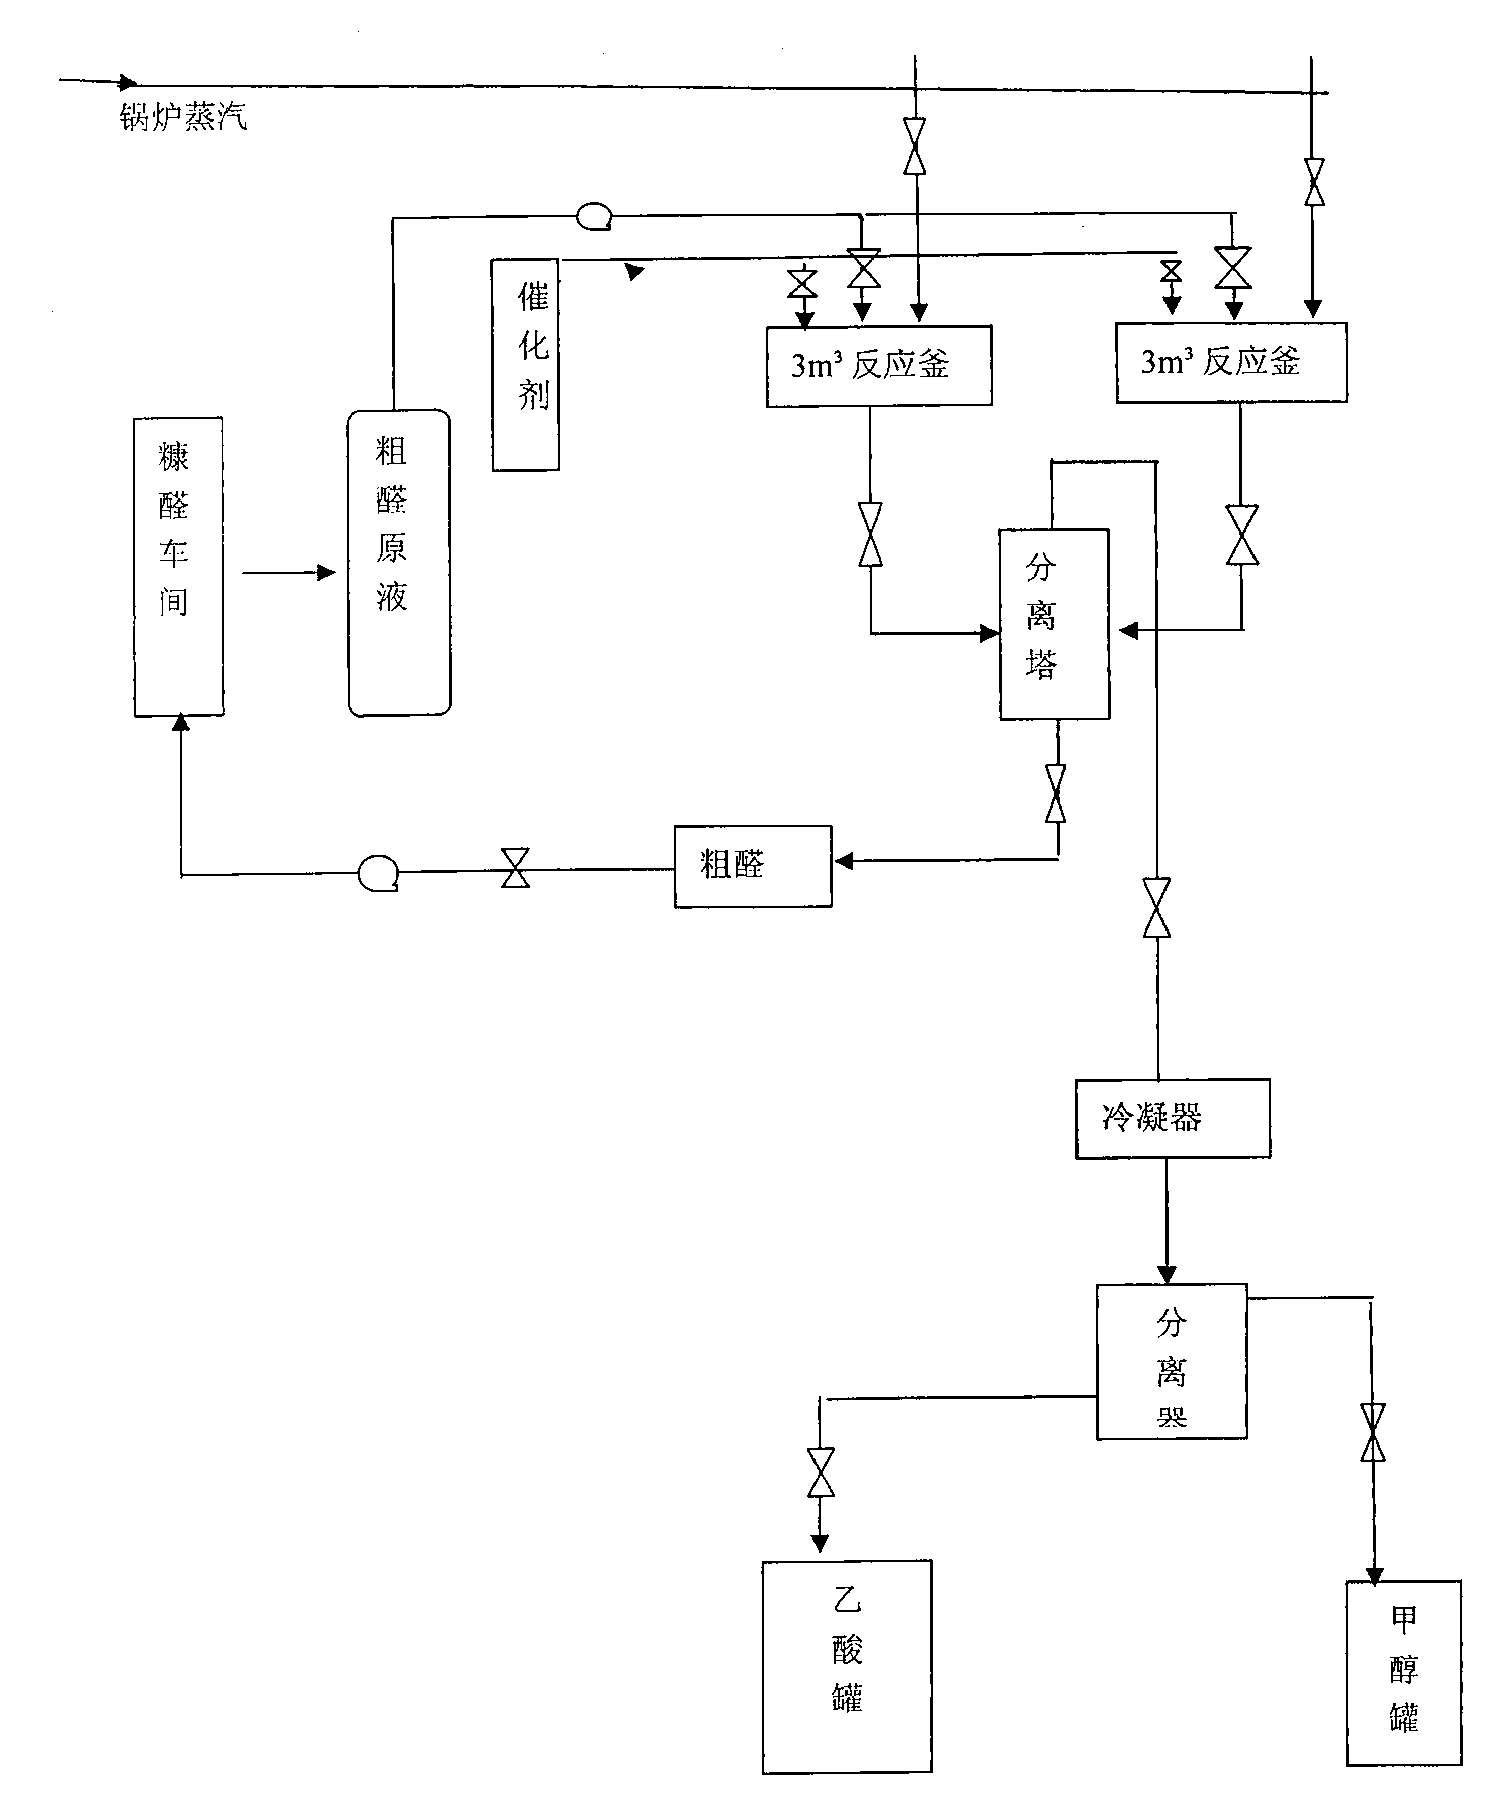 Process method for extracting methanol and acetic acid during furfuraldehyde production